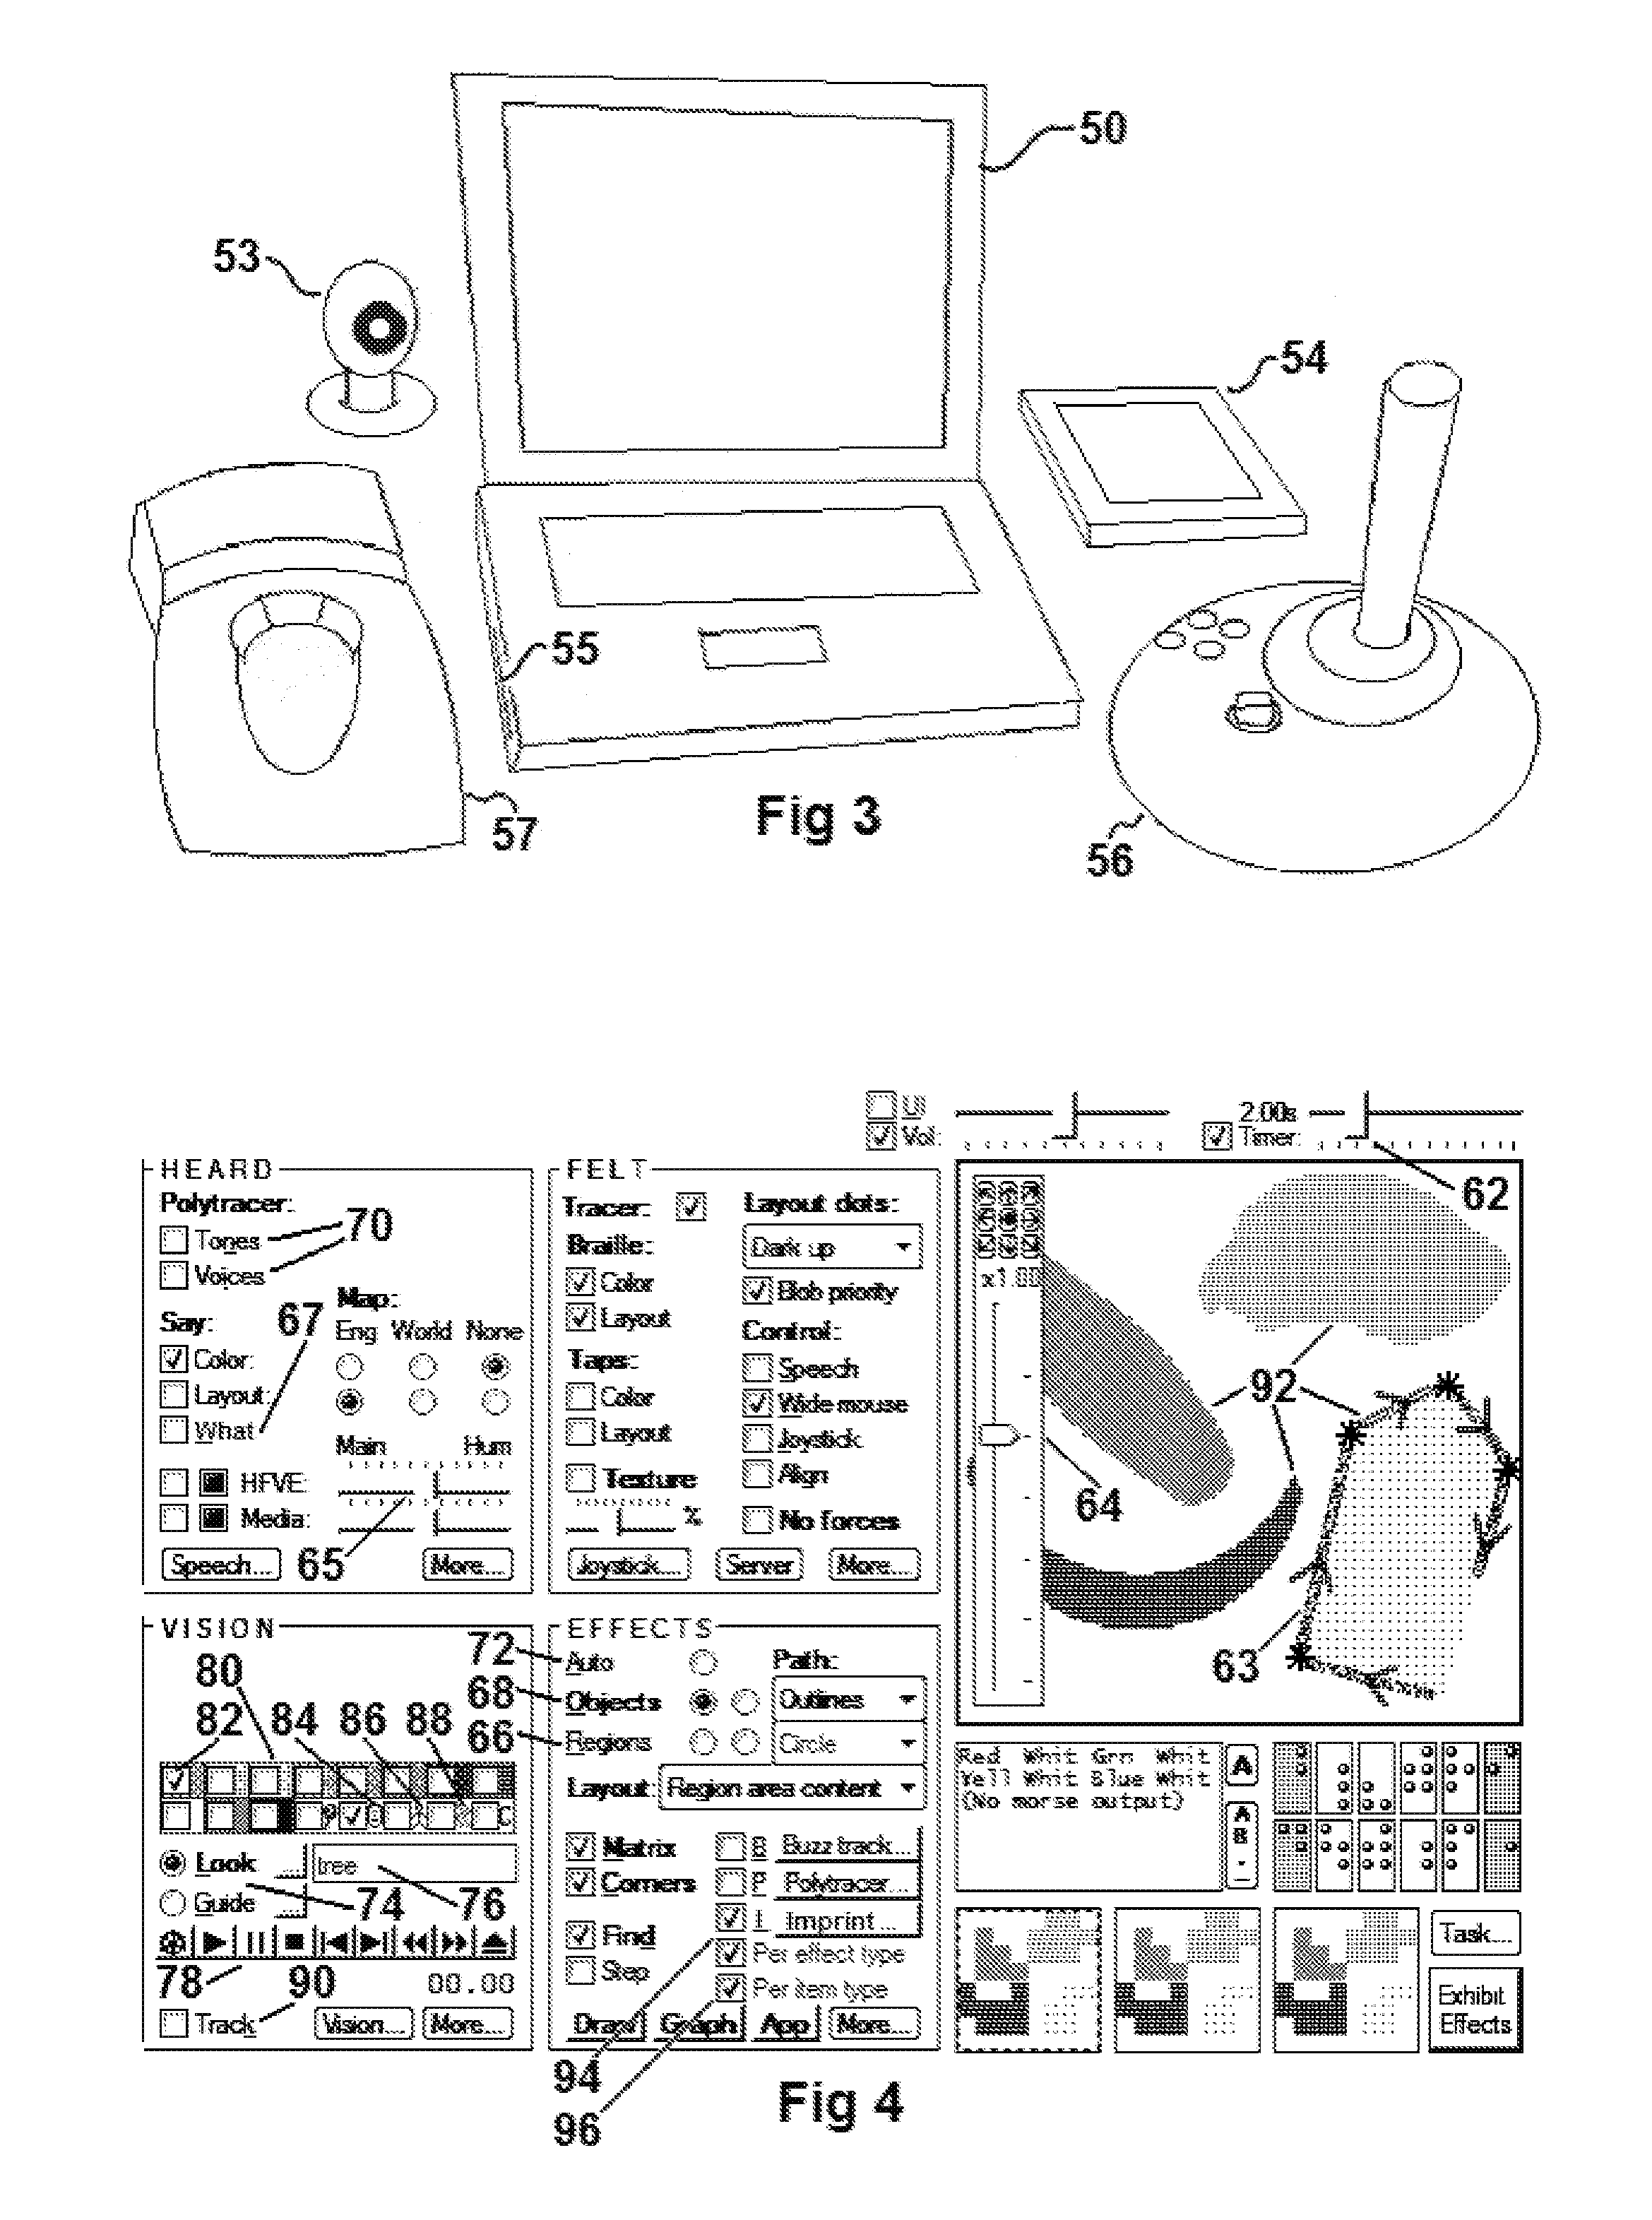 System for presenting visual items